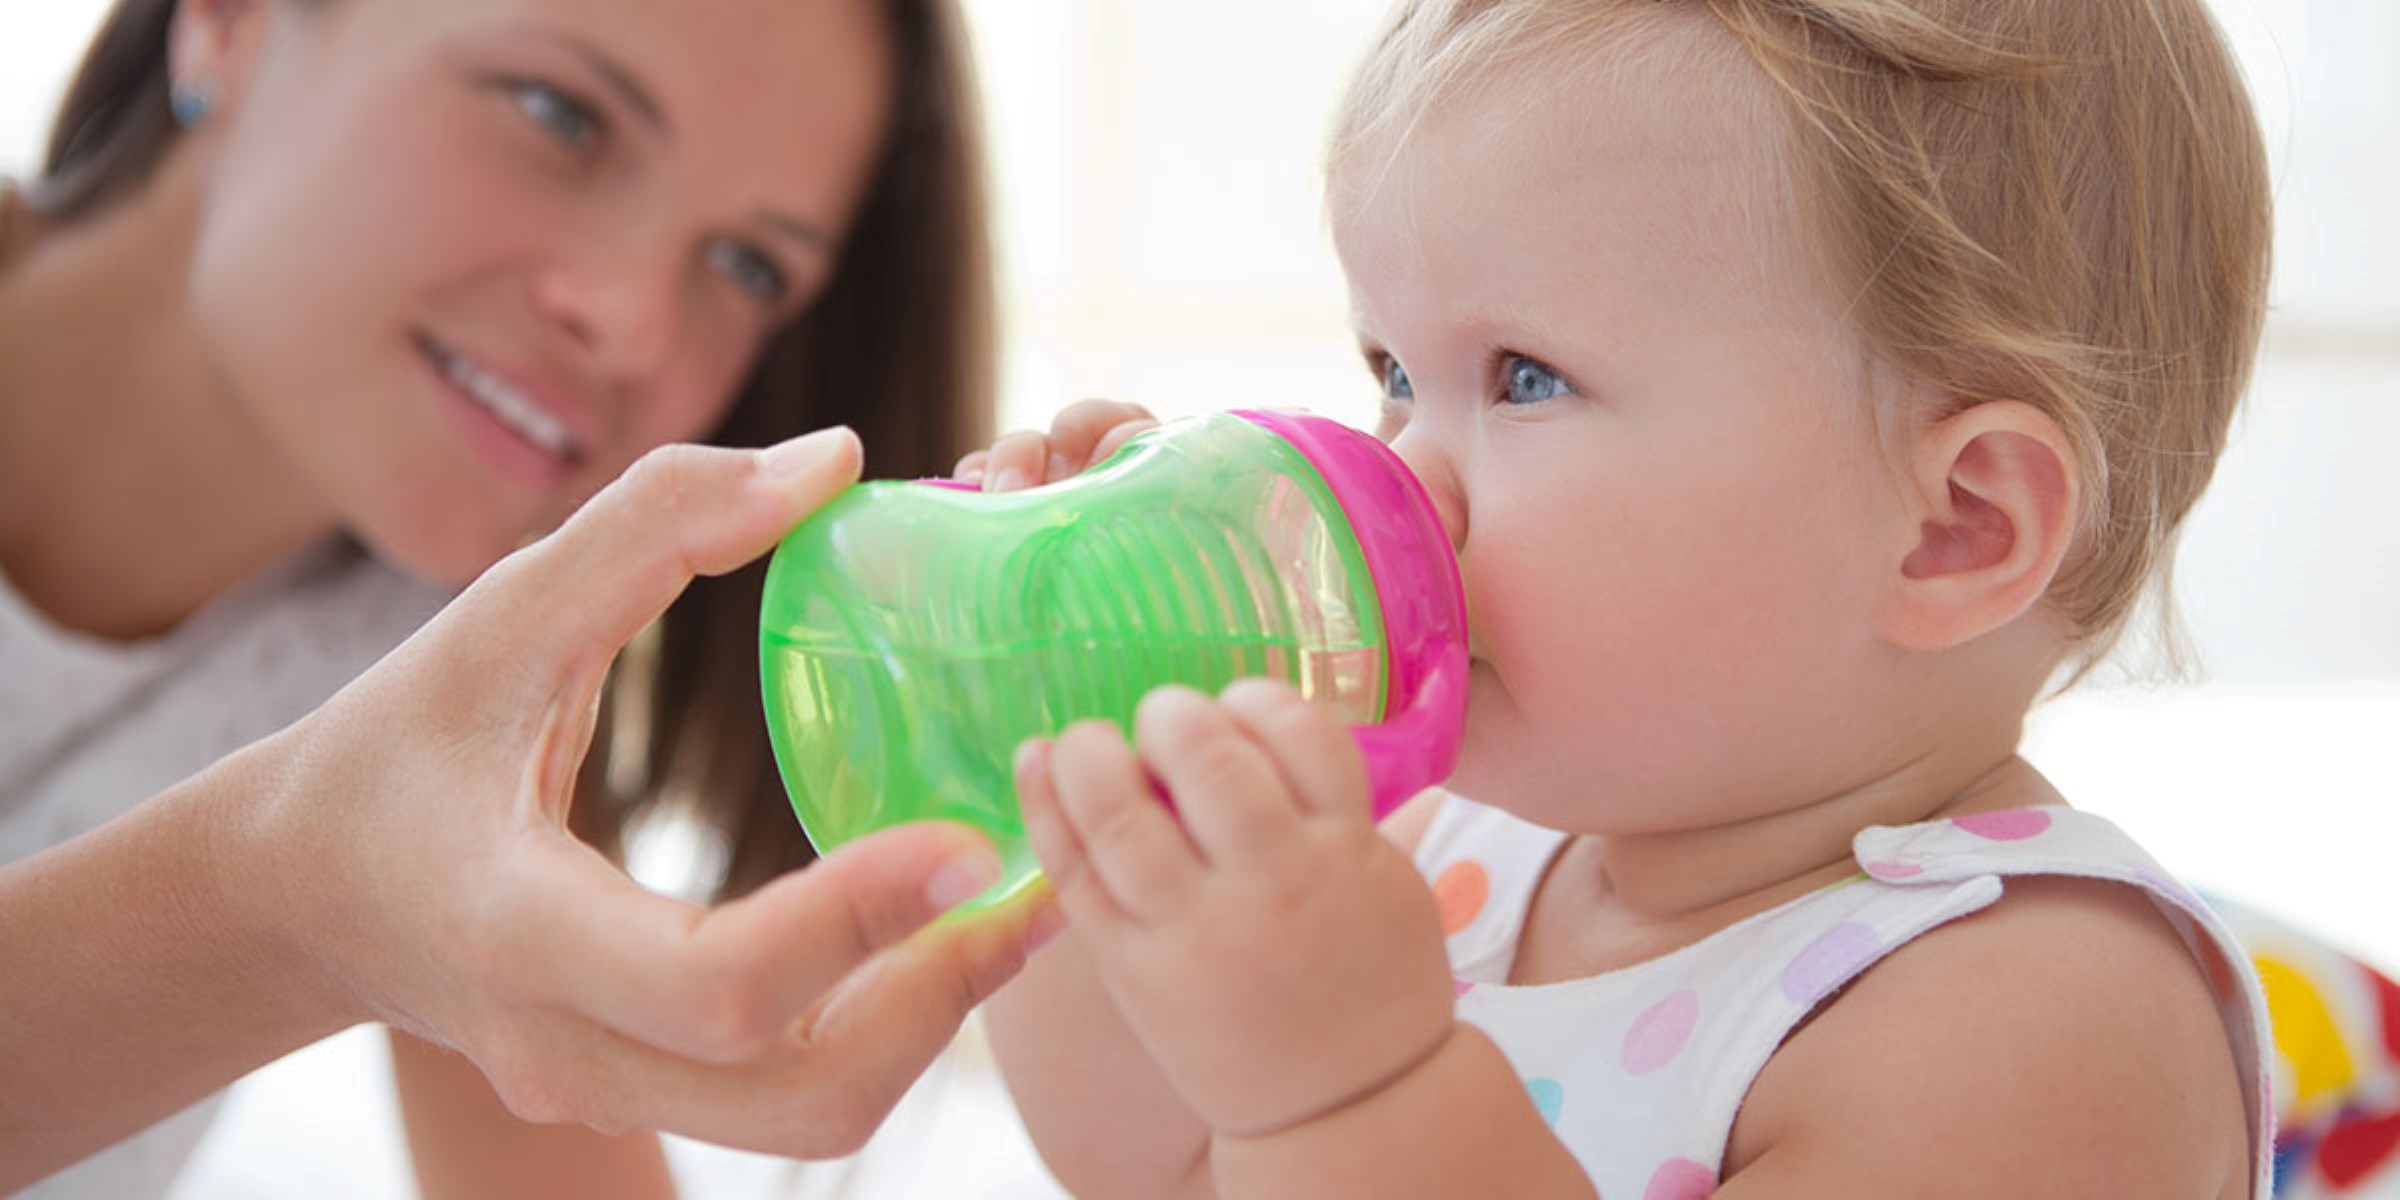 When Can Baby Start Using A Sippy Cup?